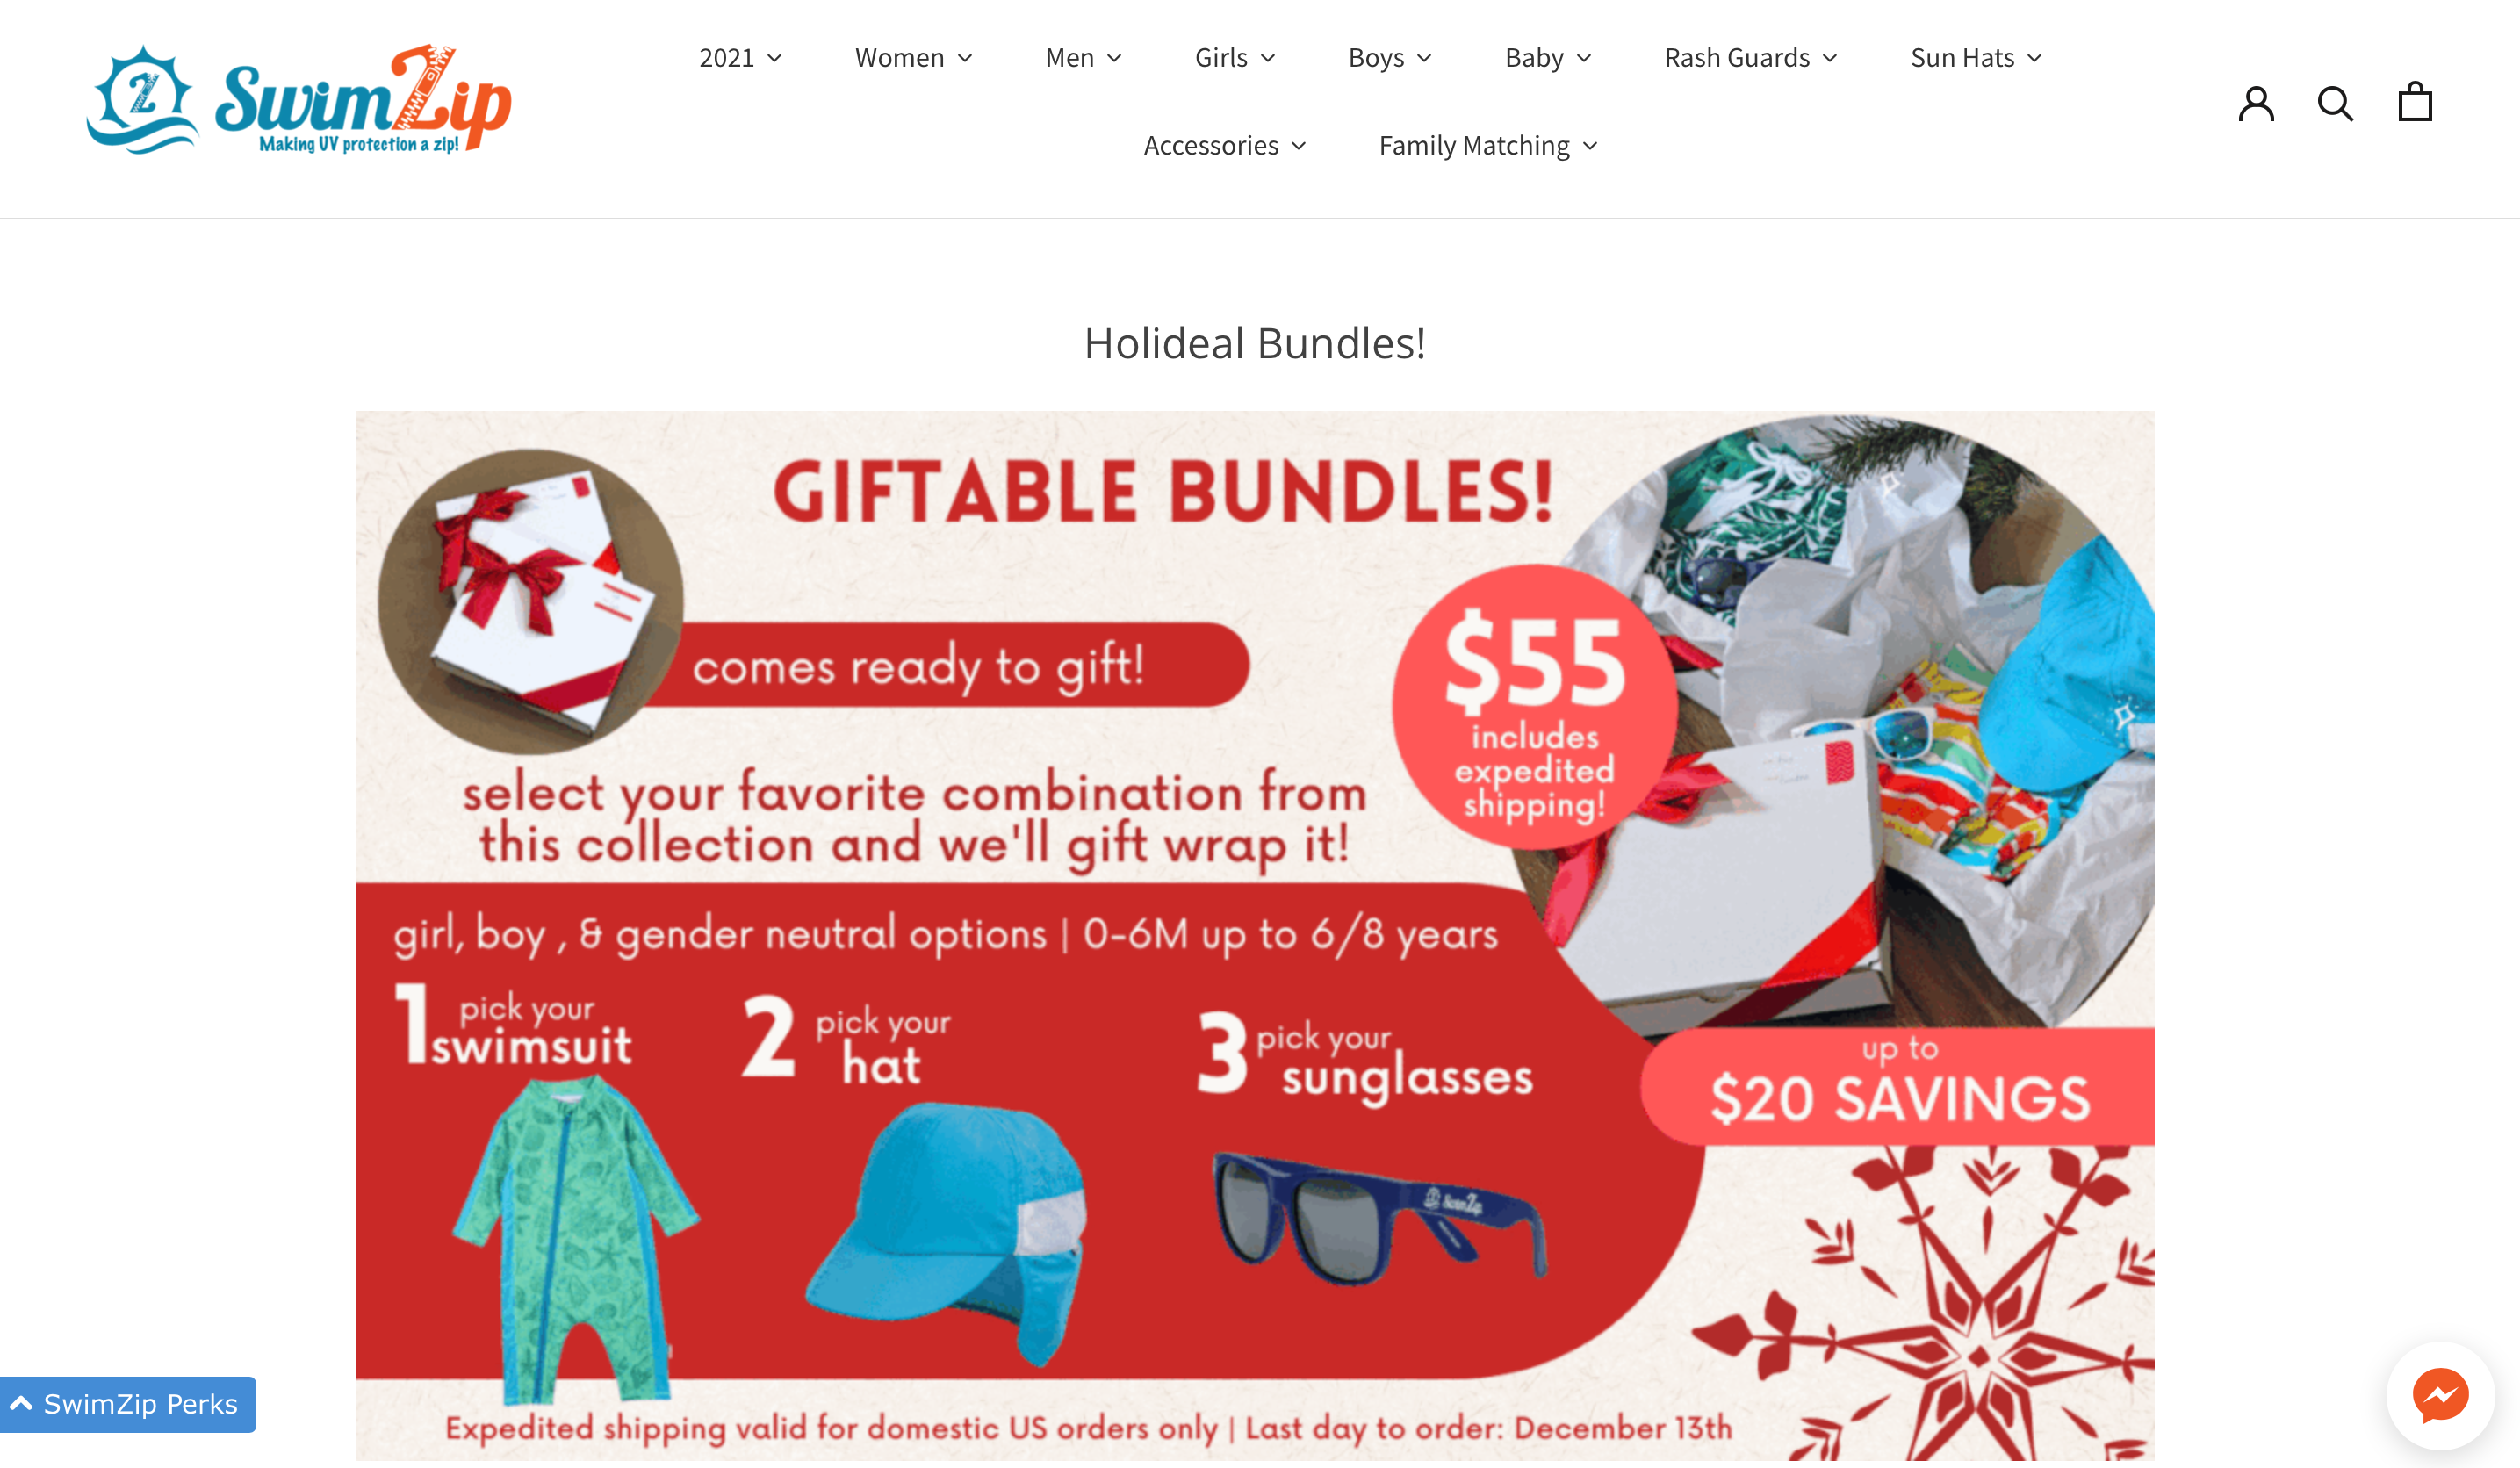 SwimZip Holideal Bundles - The Perfect Holiday Gift!